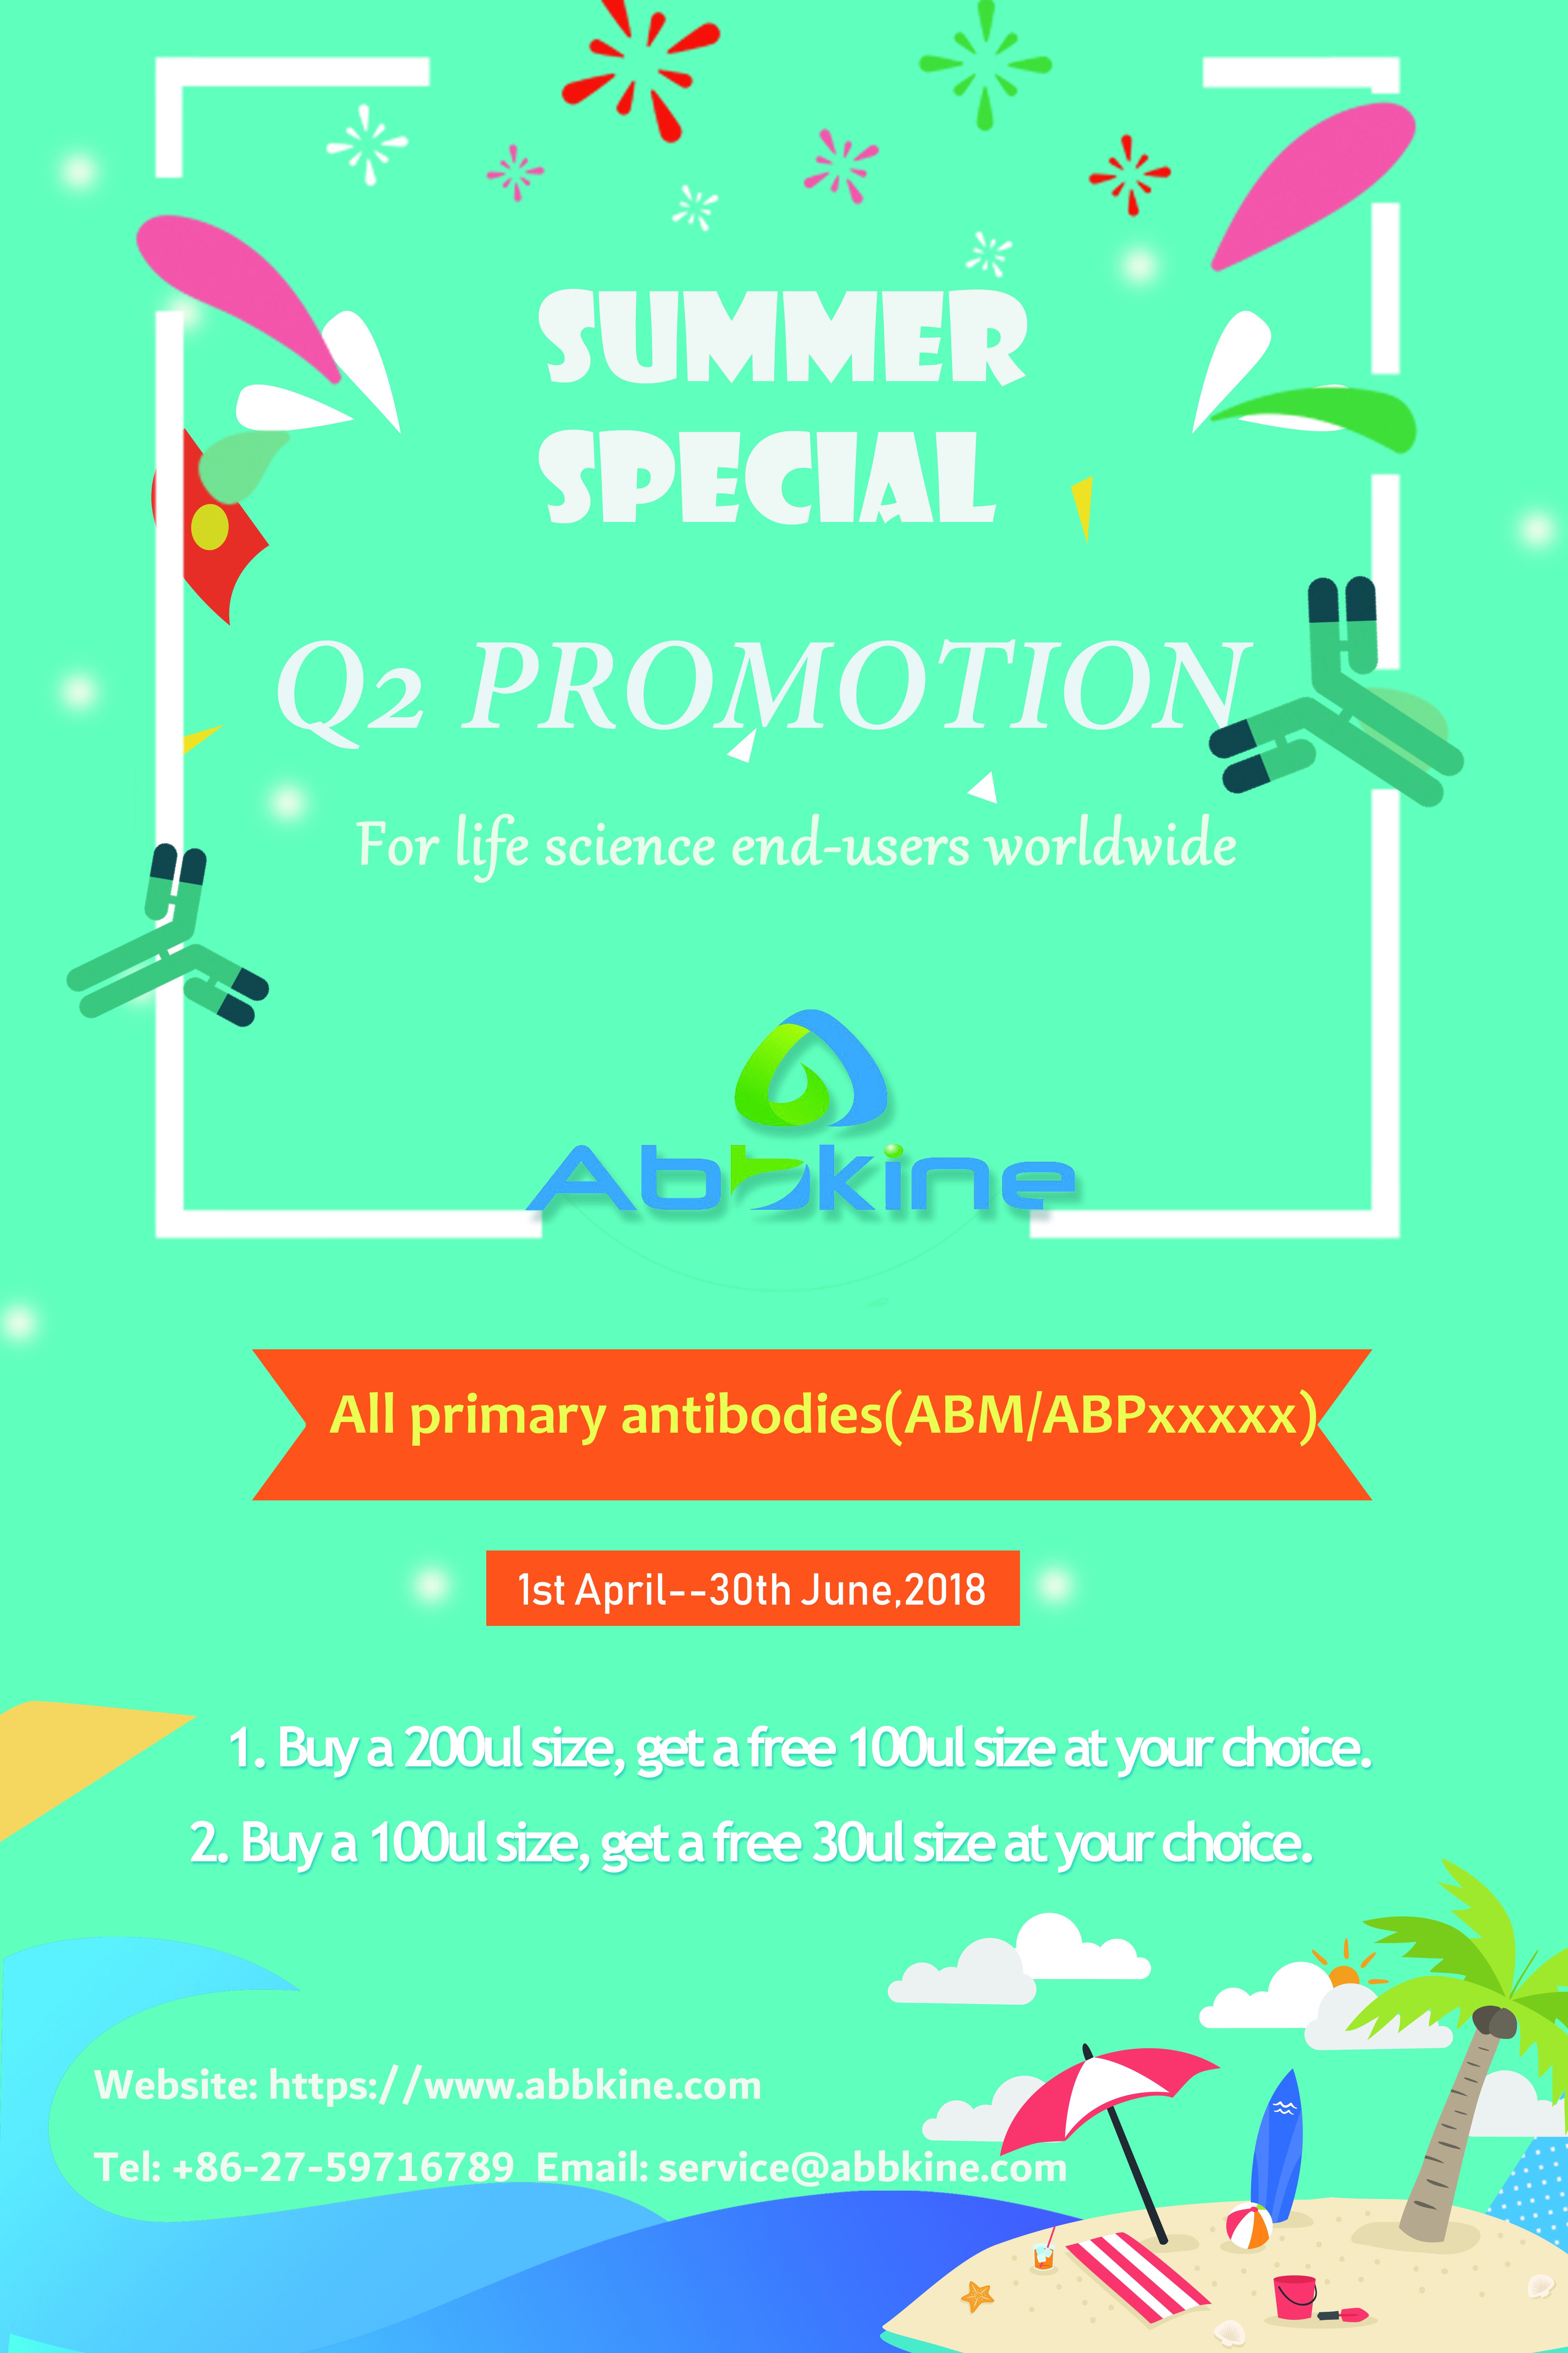 This is Primary antibodies promotion picture from Abbkine